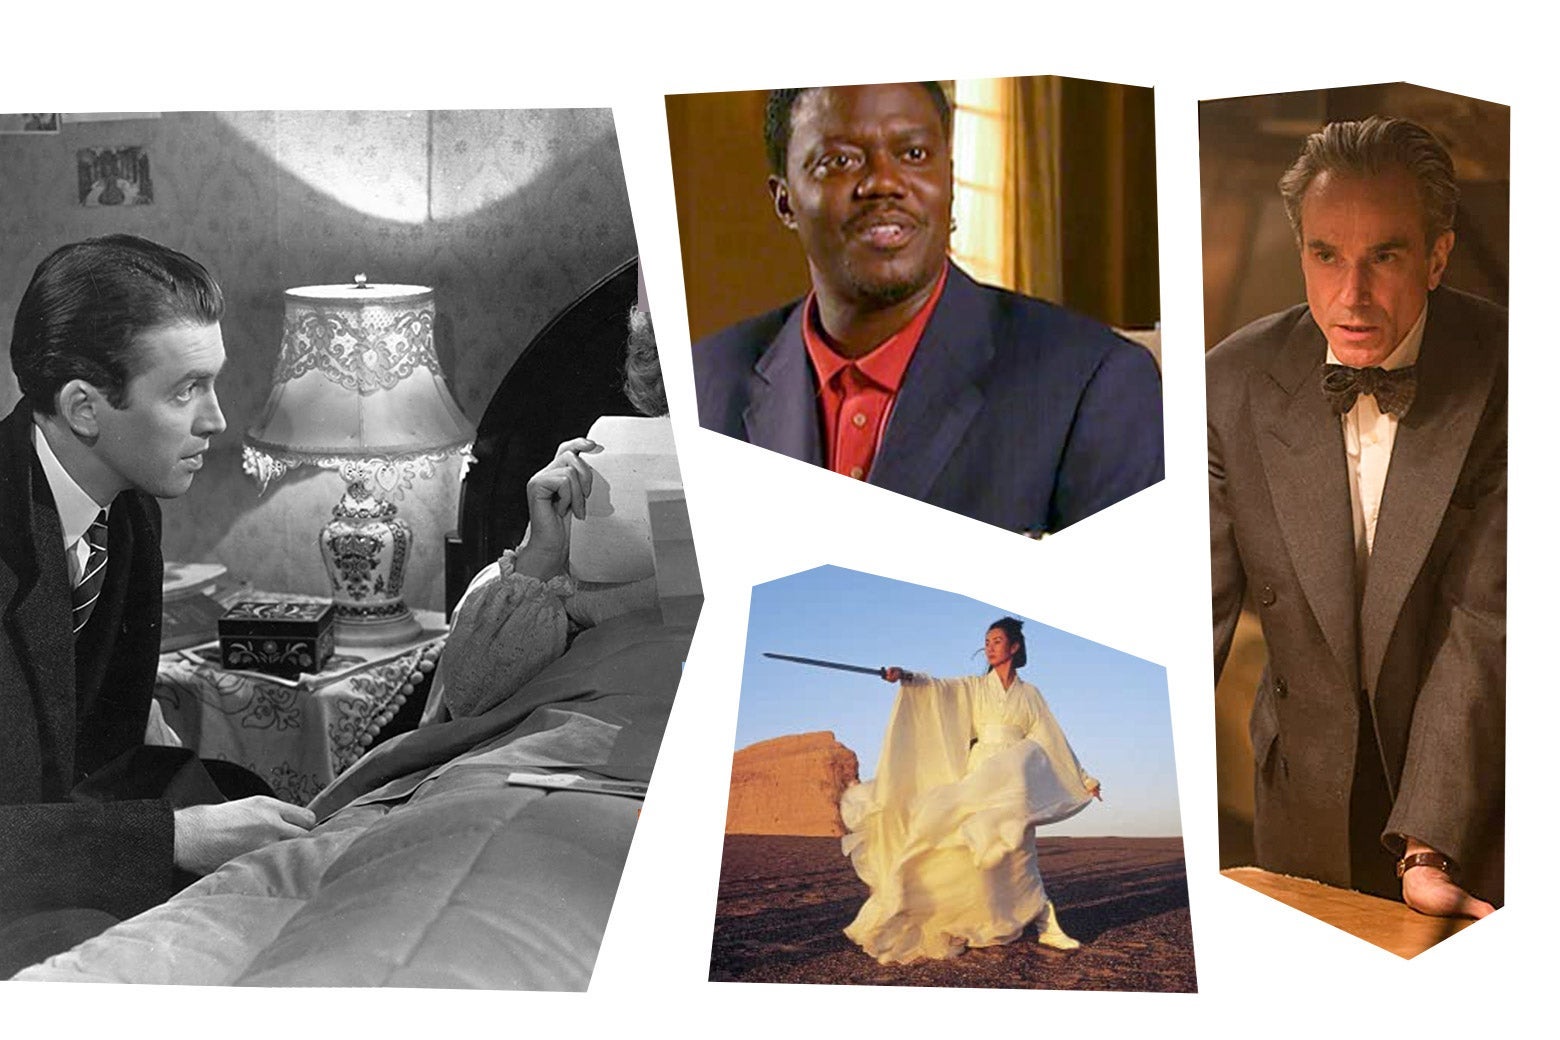 Stills from each of the movies in a mosaic art style: Jimmy Stewart sits at the bedside of Margaret Sullavan; Bernie Mac looks at the camera; Daniel Day-Lewis wears a suit with a bowtie and stands by a wooden table; Maggie Cheung wearing a flowing white dress stands in the desert holding a sword aloft.